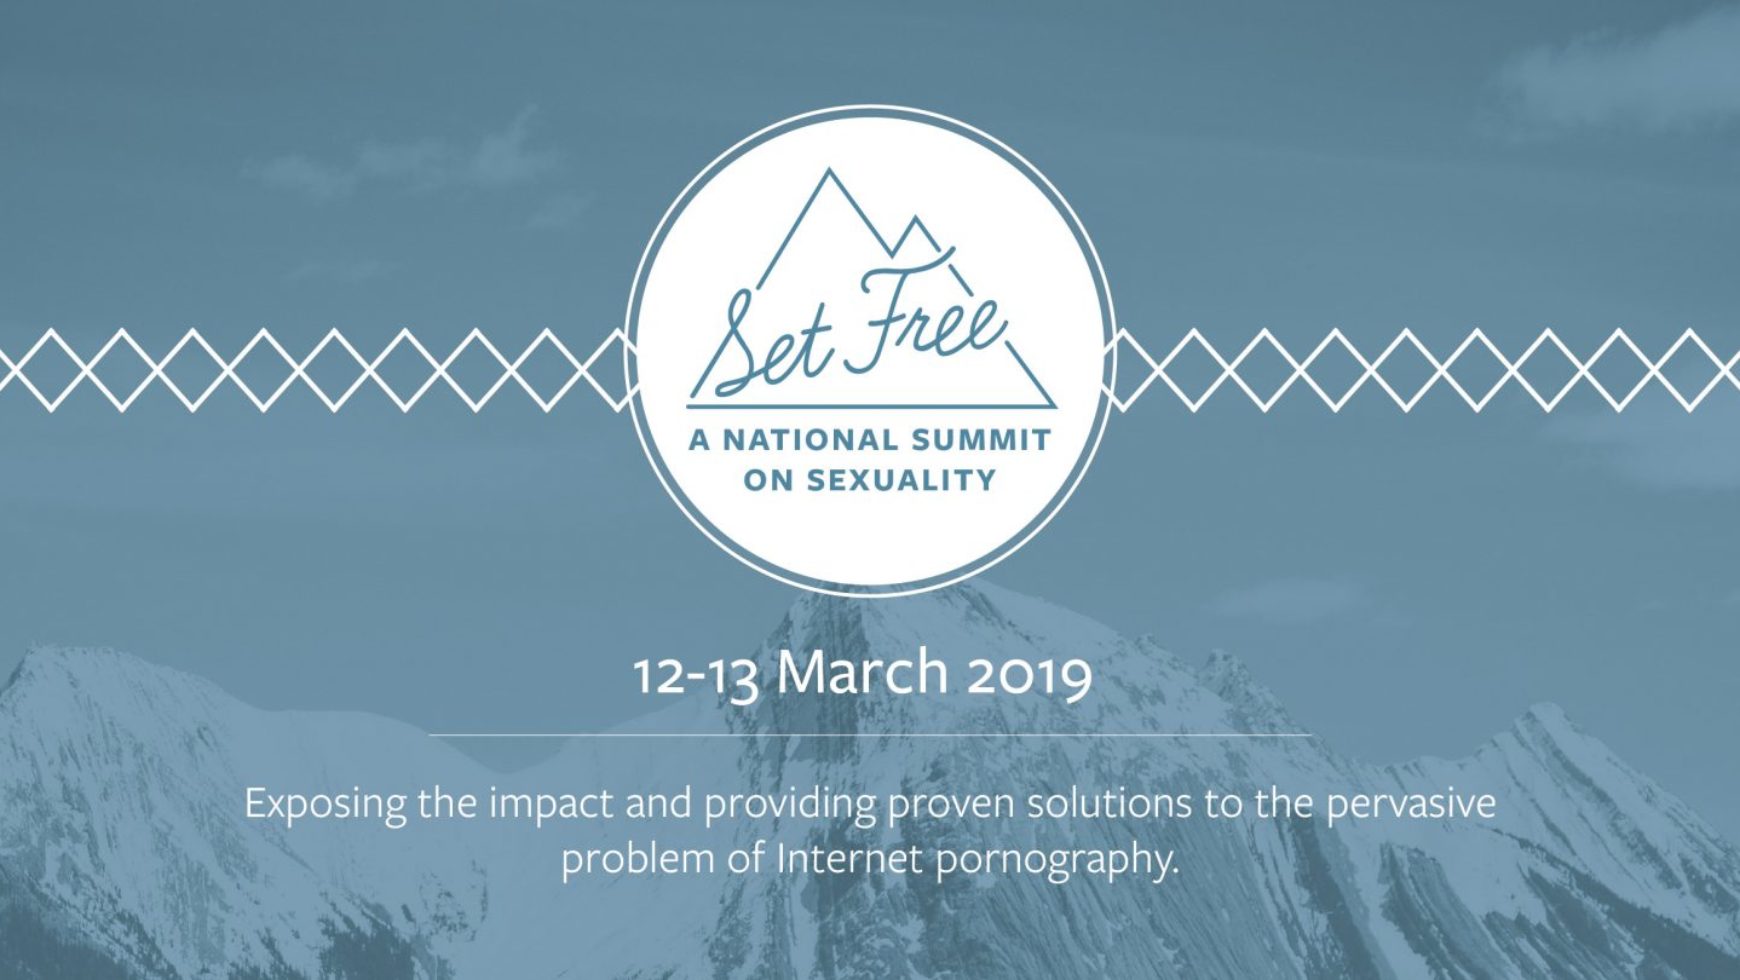 SET FREE – A NATIONAL SUMMIT ON SEXUALITY